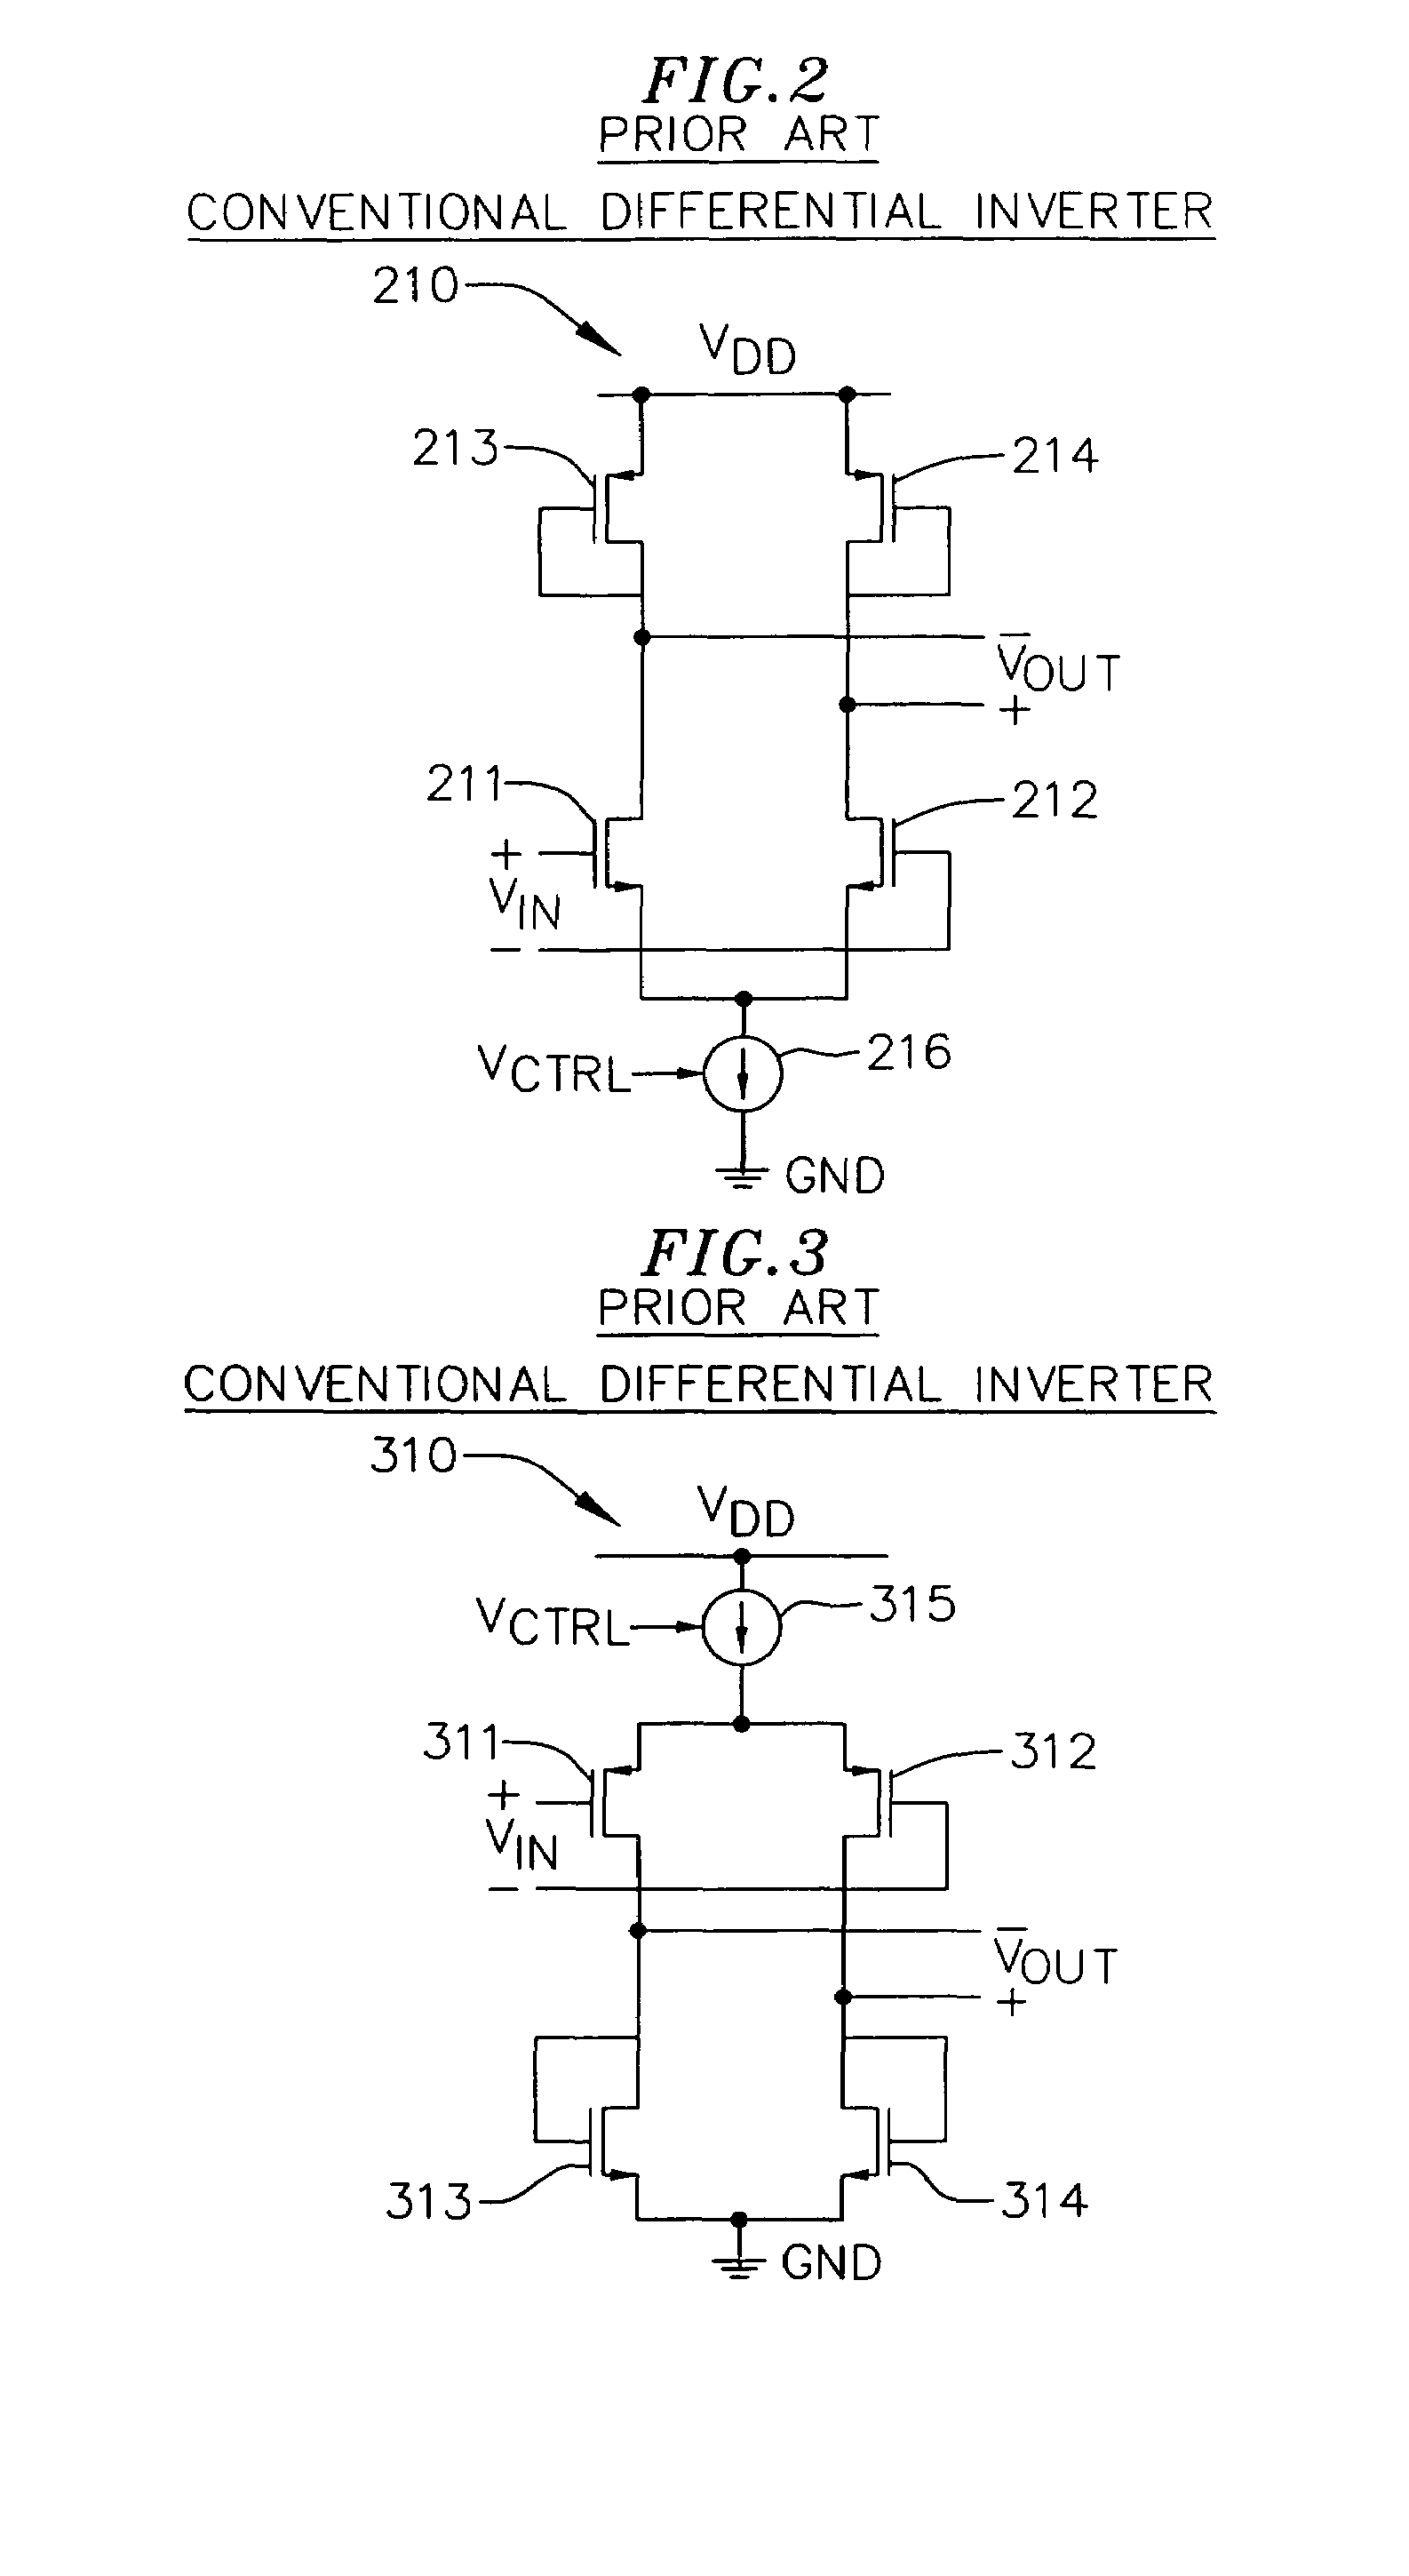 High noise rejection voltage-controlled ring oscillator architecture